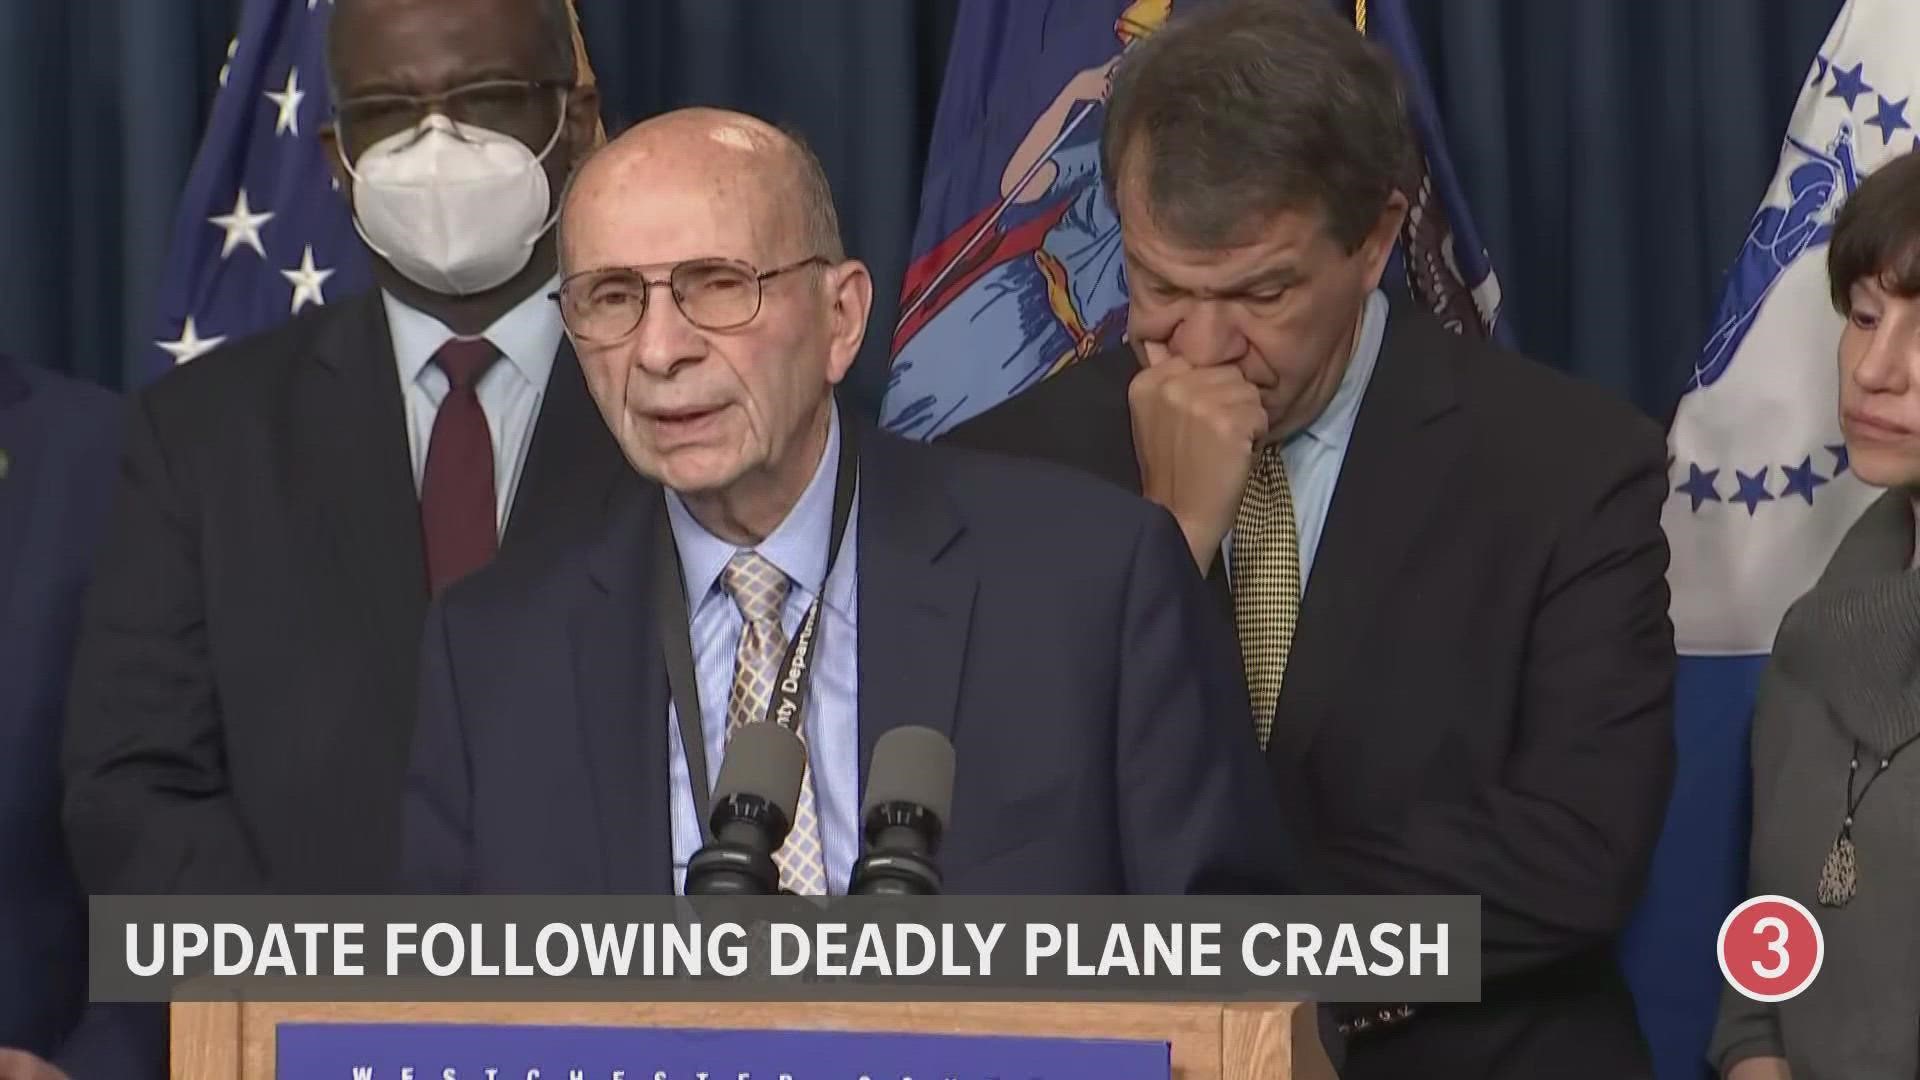 Westchester County Department of Emergency Services Commissioner Richard Wishnie explains how authorities were able to find the site of the deadly plane crash.